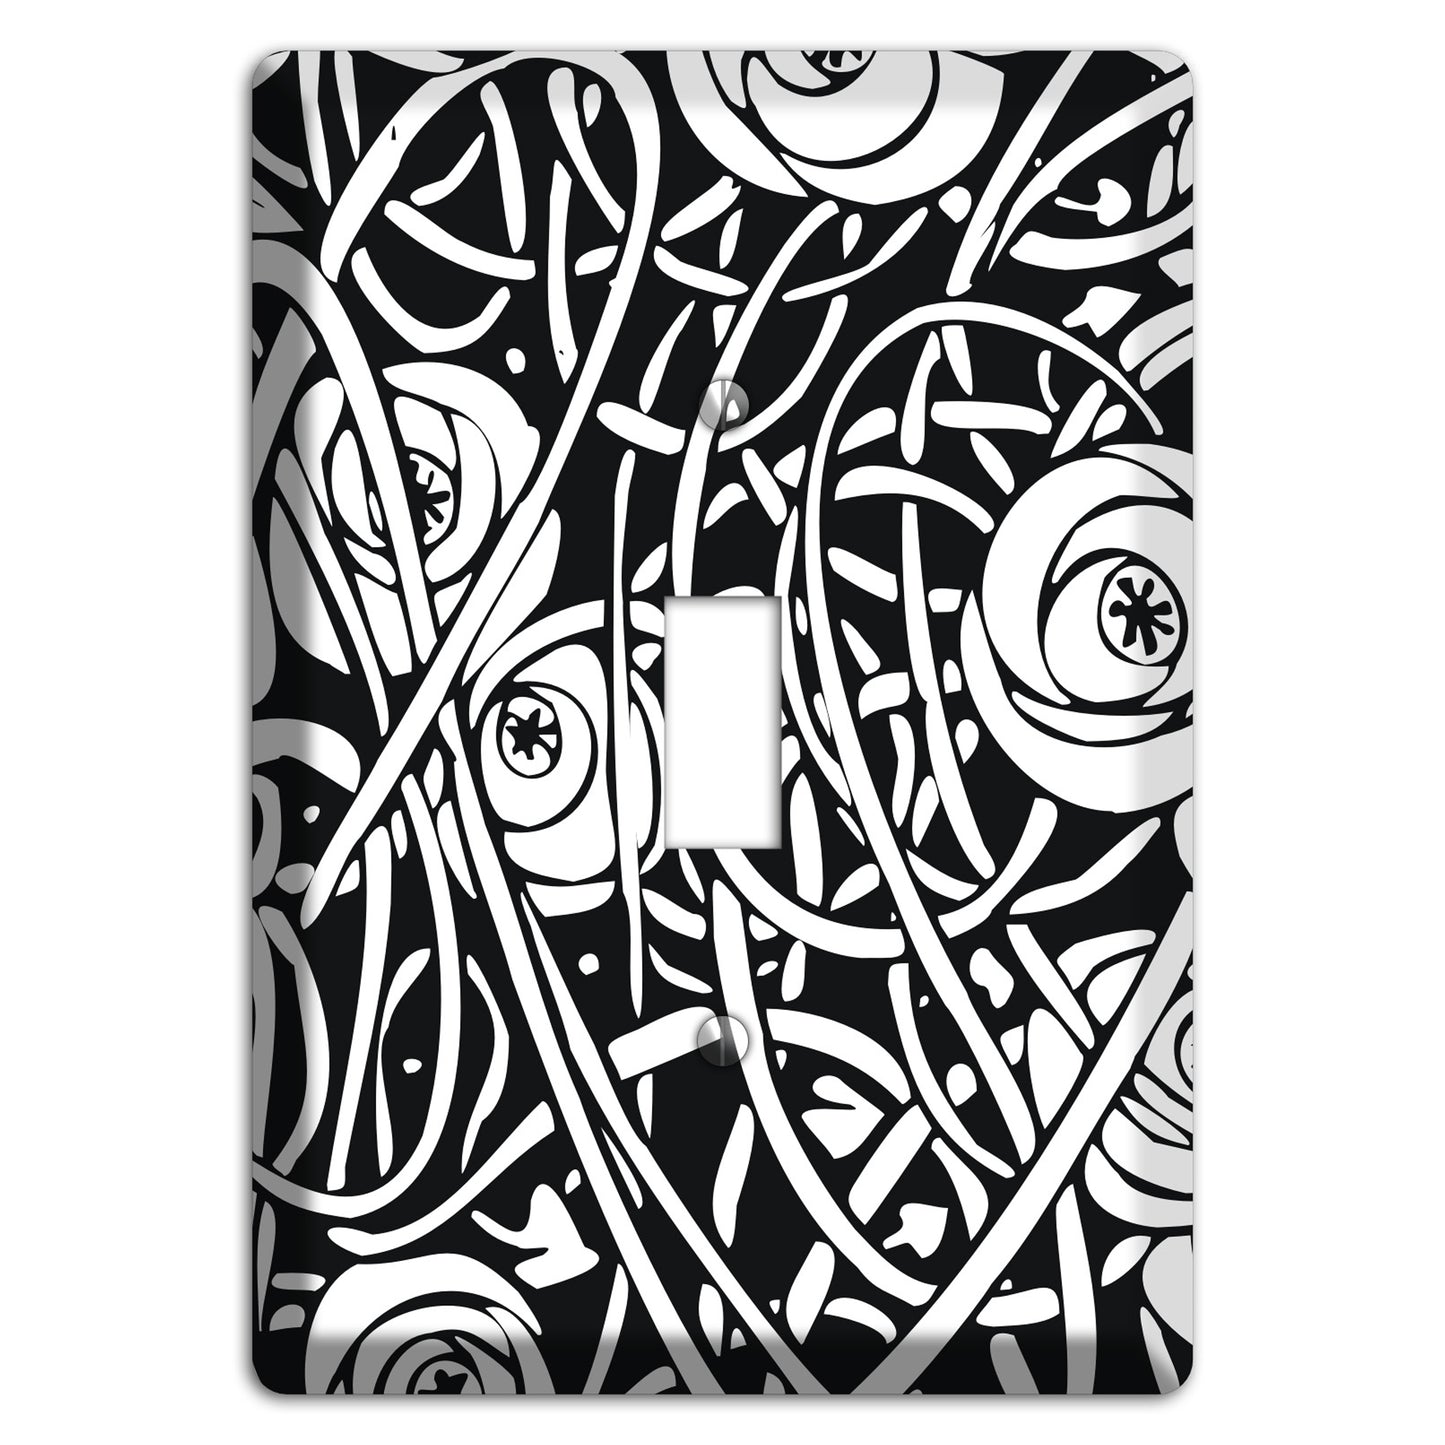 Black and White Deco Floral Cover Plates